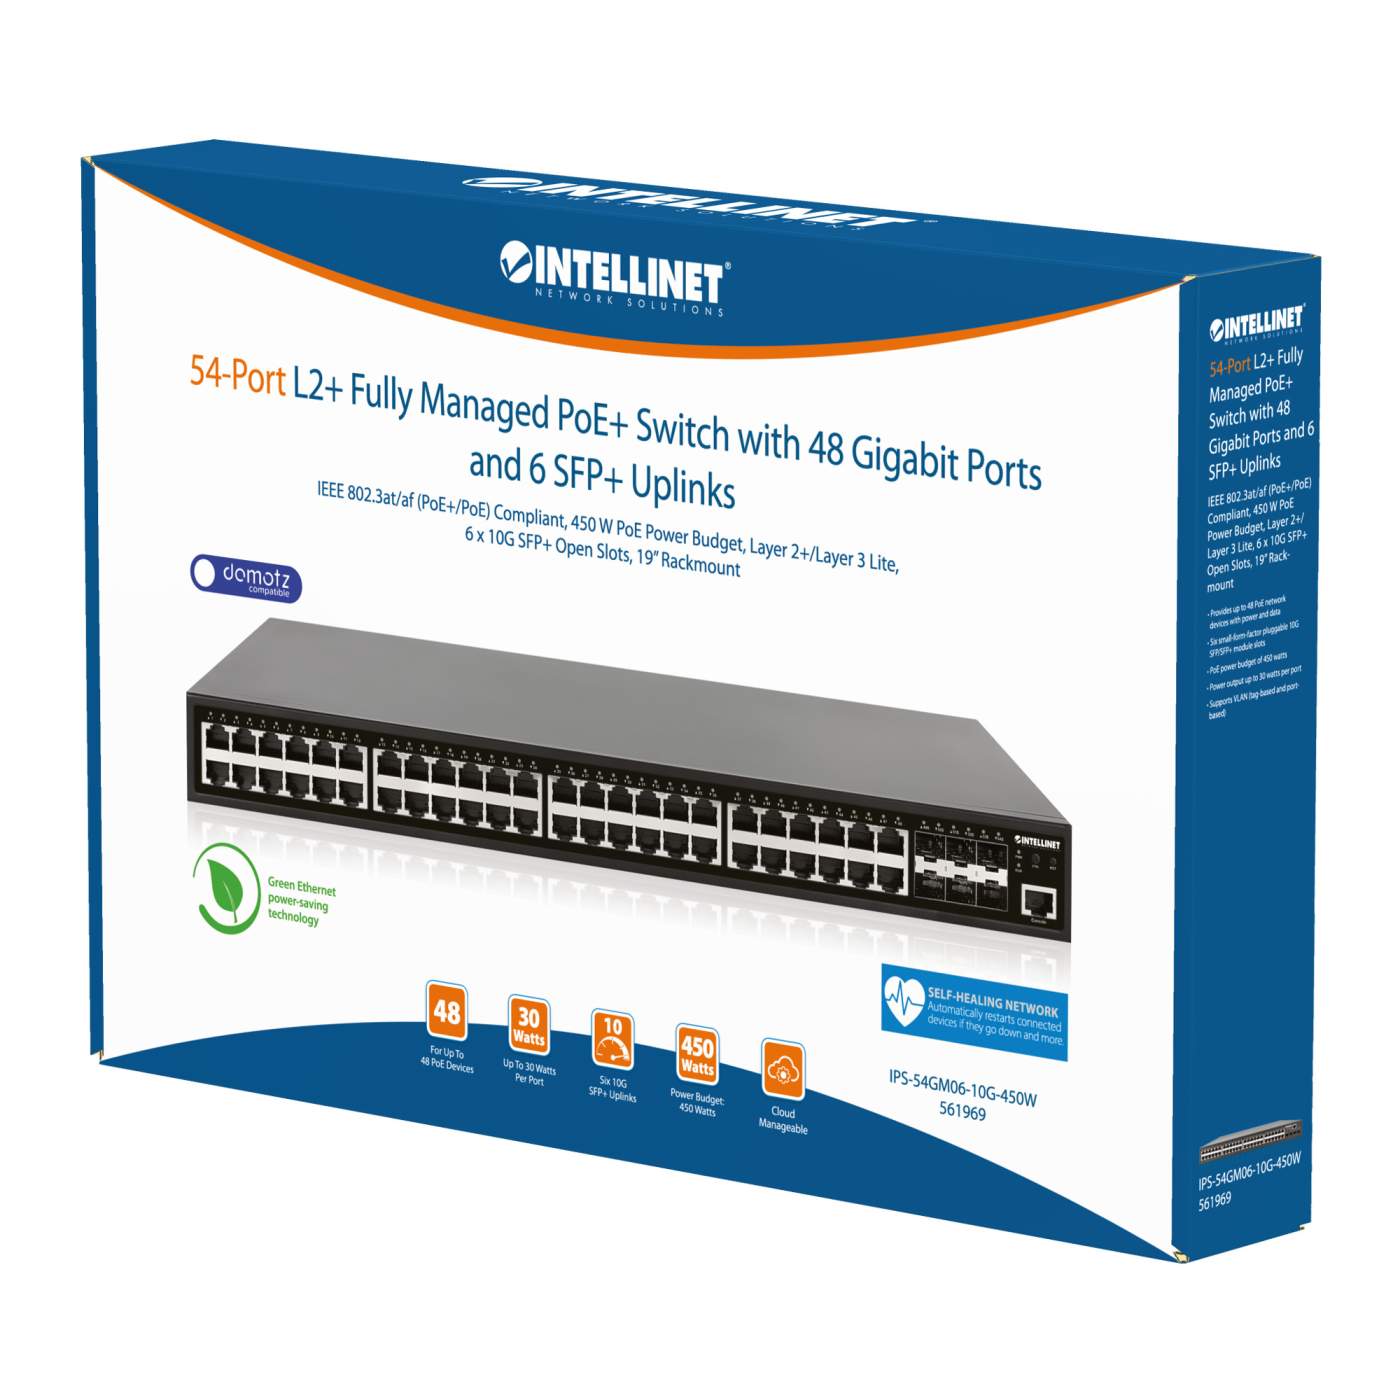 54-Port L2+ Fully Managed PoE+ Switch with 48 Gigabit Ethernet Ports and 6 SFP+ Uplinks Packaging Image 2